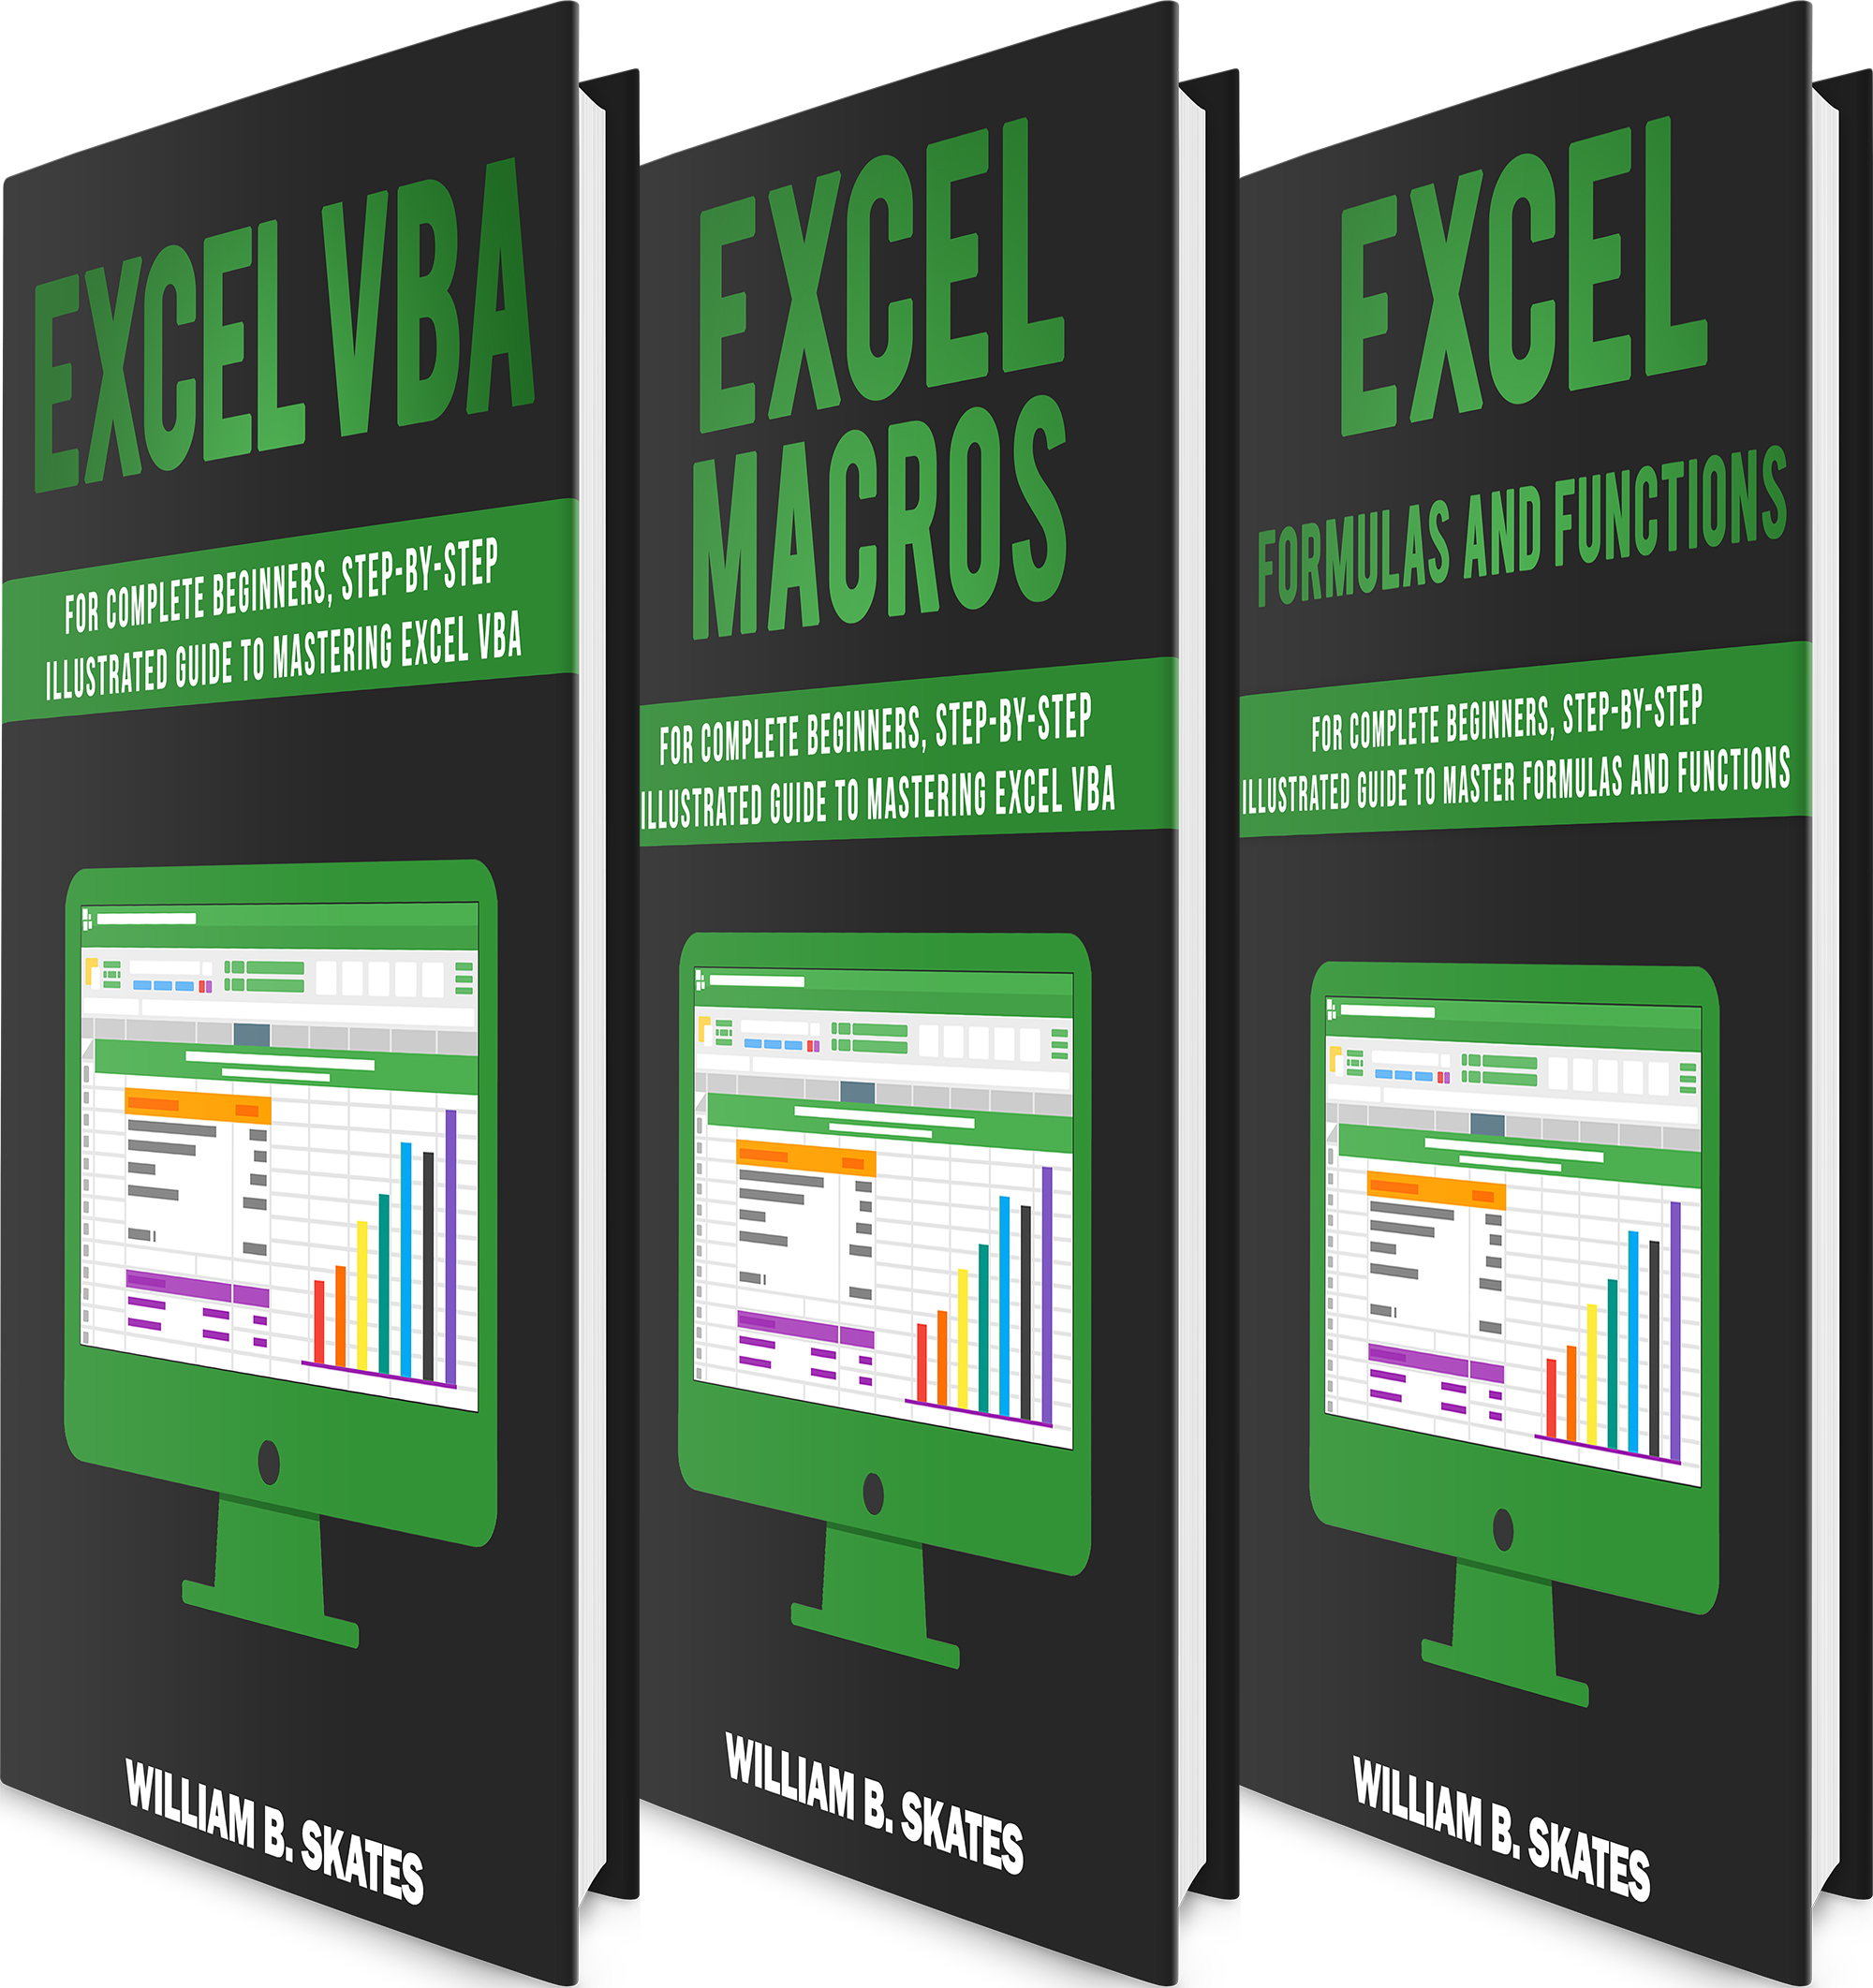 FREE: Excel Master: The Complete 3 Books in 1 for Excel by William B. Skates